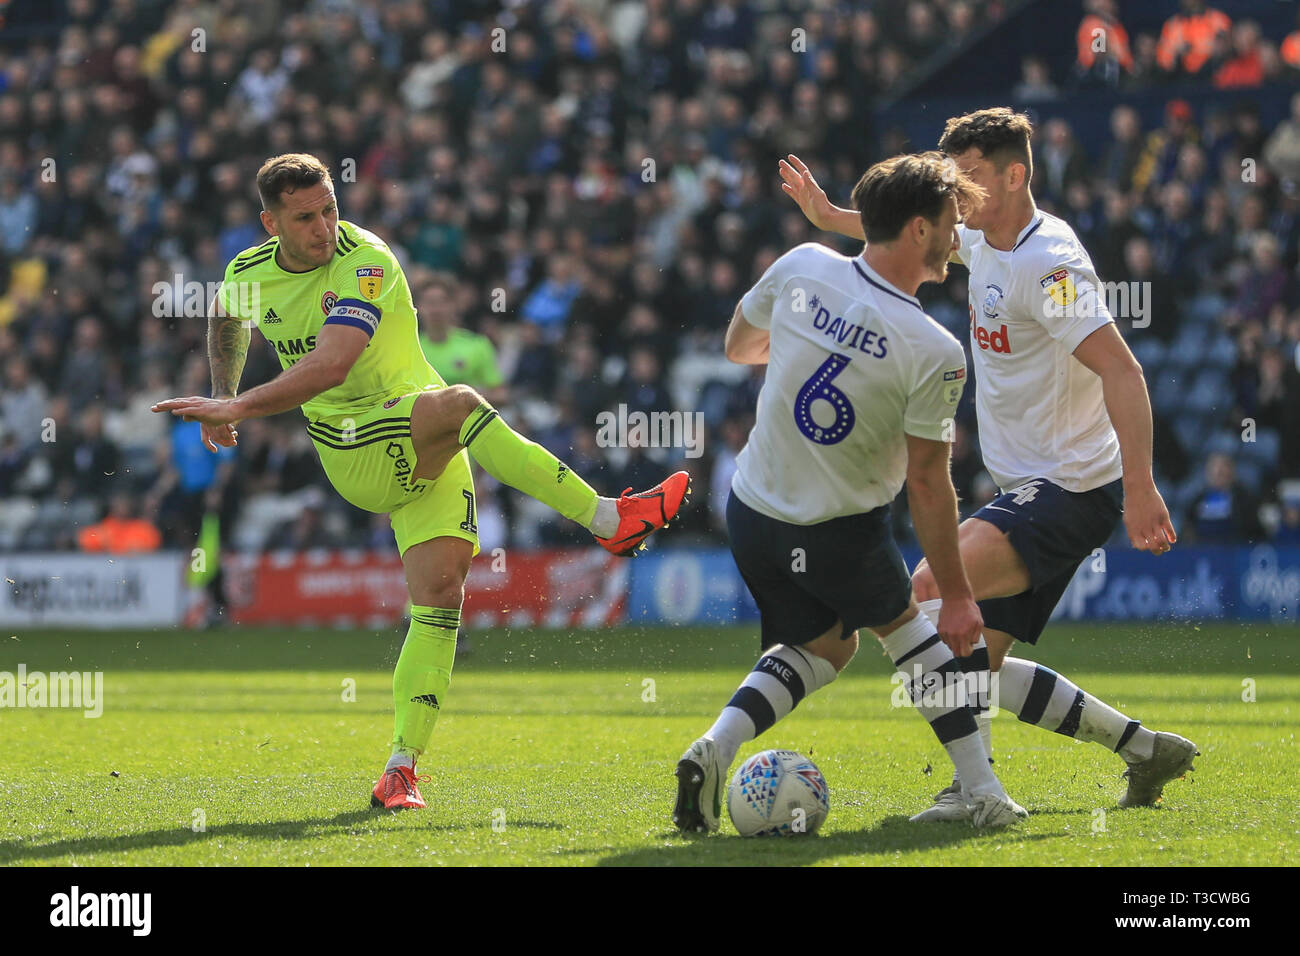 6th April 2019 , Deepdale, Preston, England; Sky Bet Championship, Preston North End vs Sheffield United ;  Ben Davies of (06) Preston blocks Billy Sharp (10) of Sheffield United’s shot on goal   Credit: Mark Cosgrove/News Images  English Football League images are subject to DataCo Licence Stock Photo